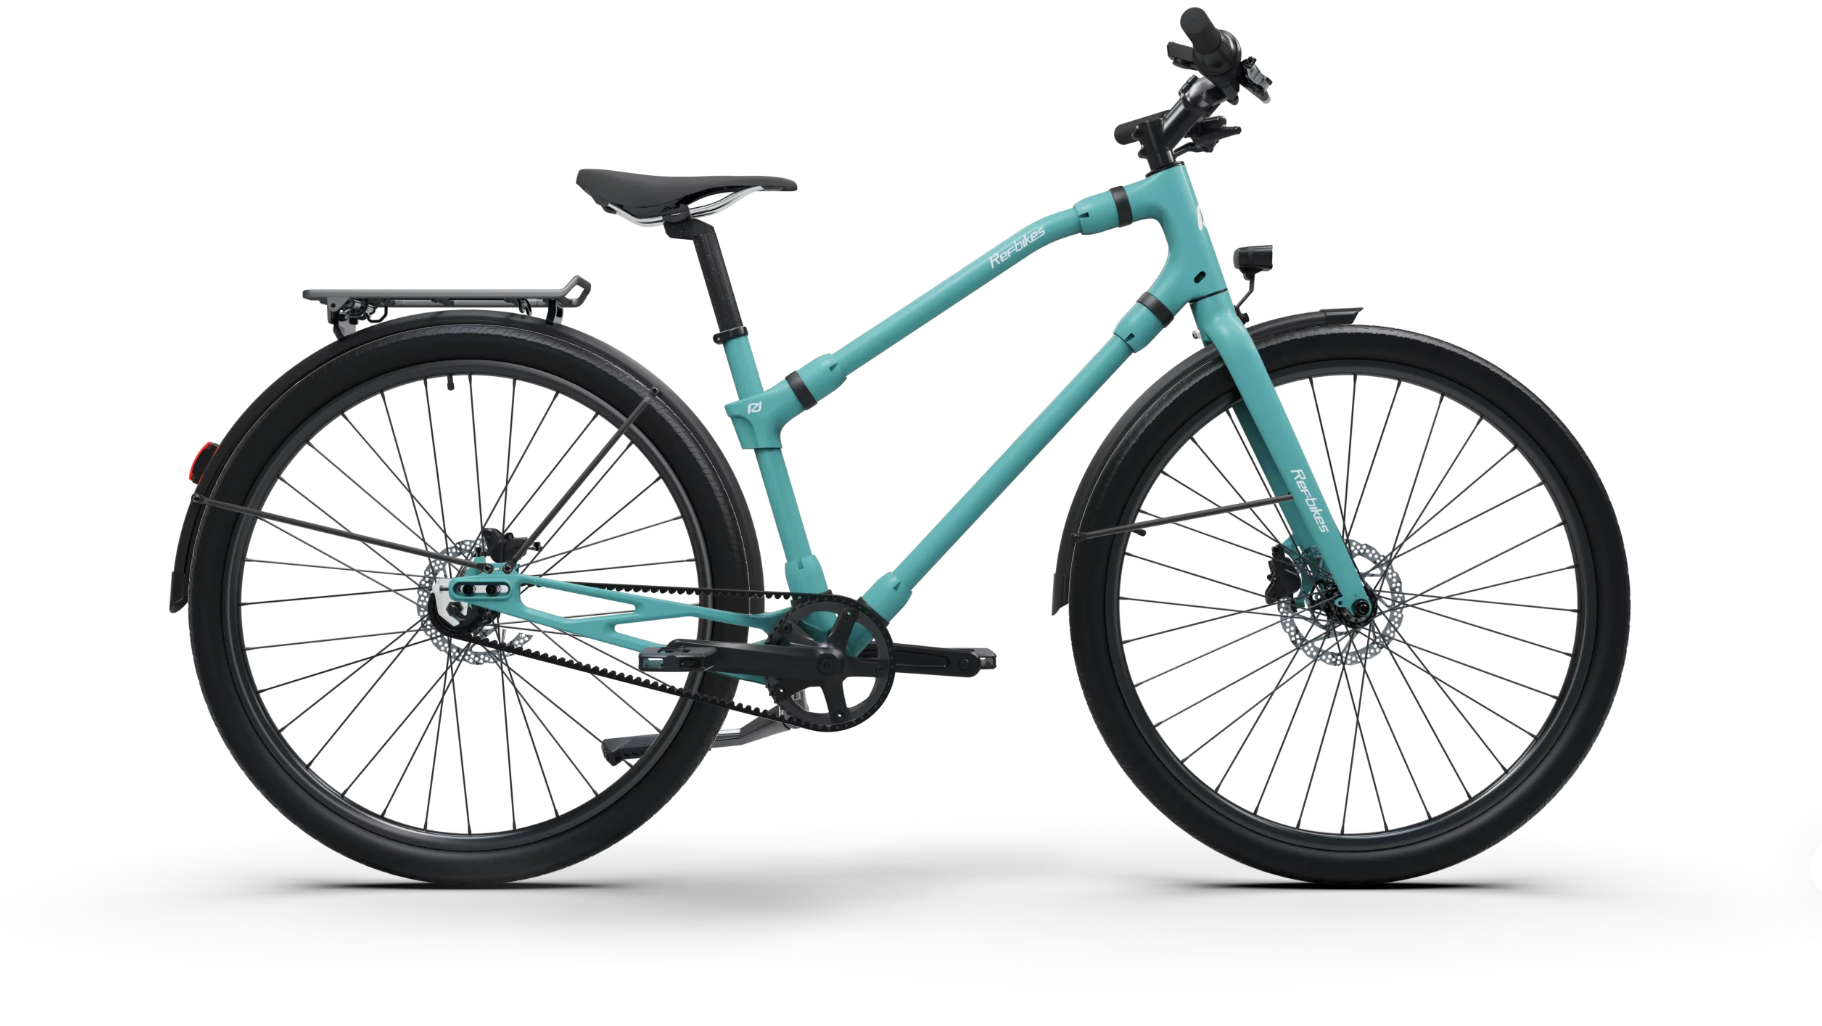 Pastel blue Ref Urban bike with sleek design, perfect for eco-friendly urban commuting and stylish city rides.